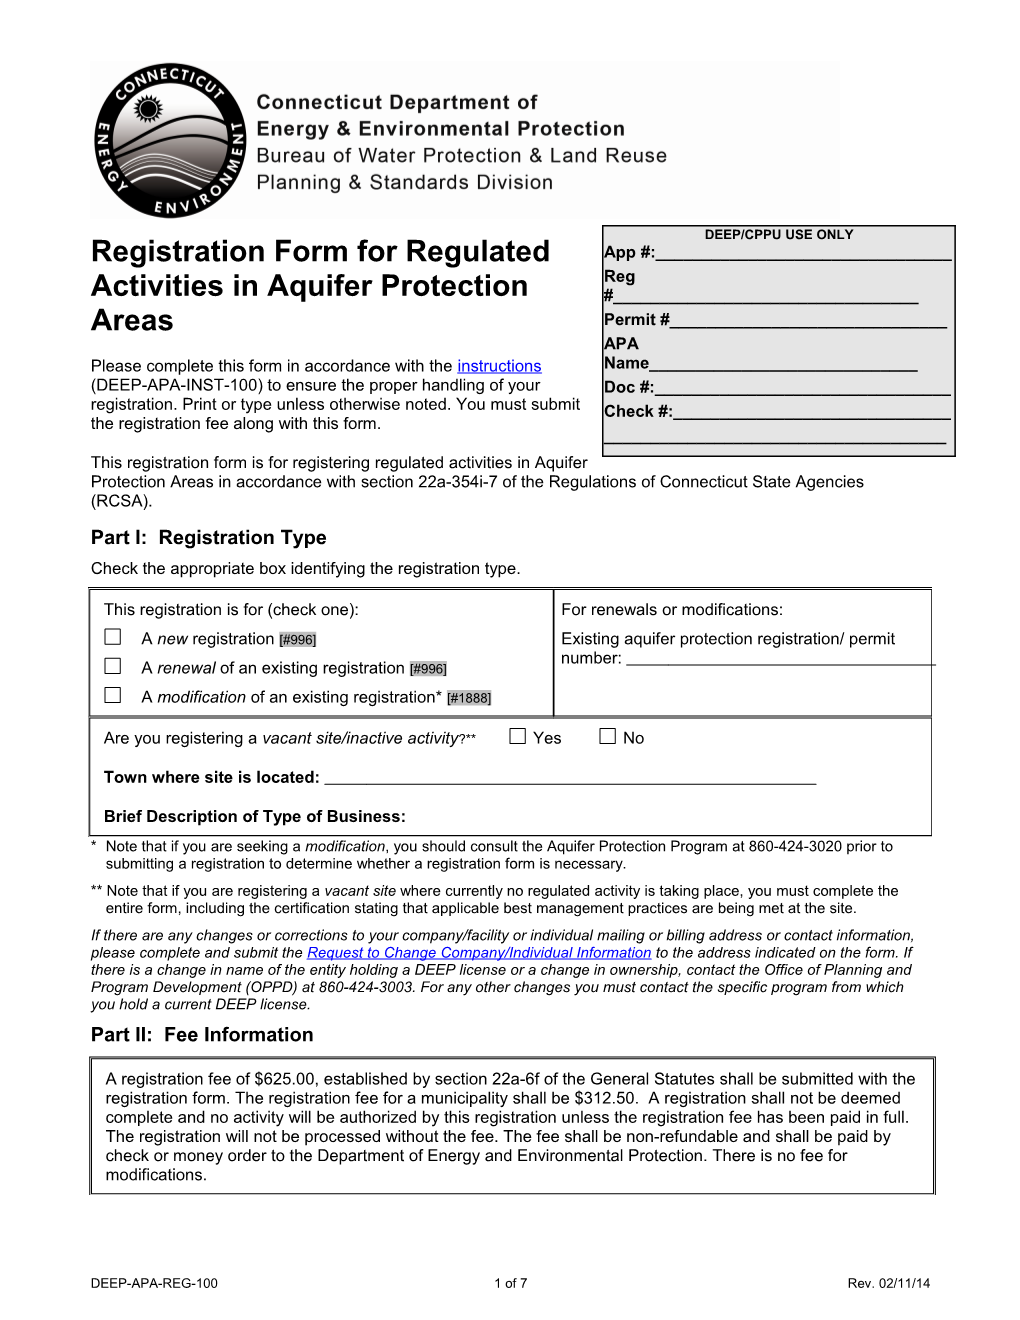 Registration Form for Regulated Activities in Aquifer Protection Areas